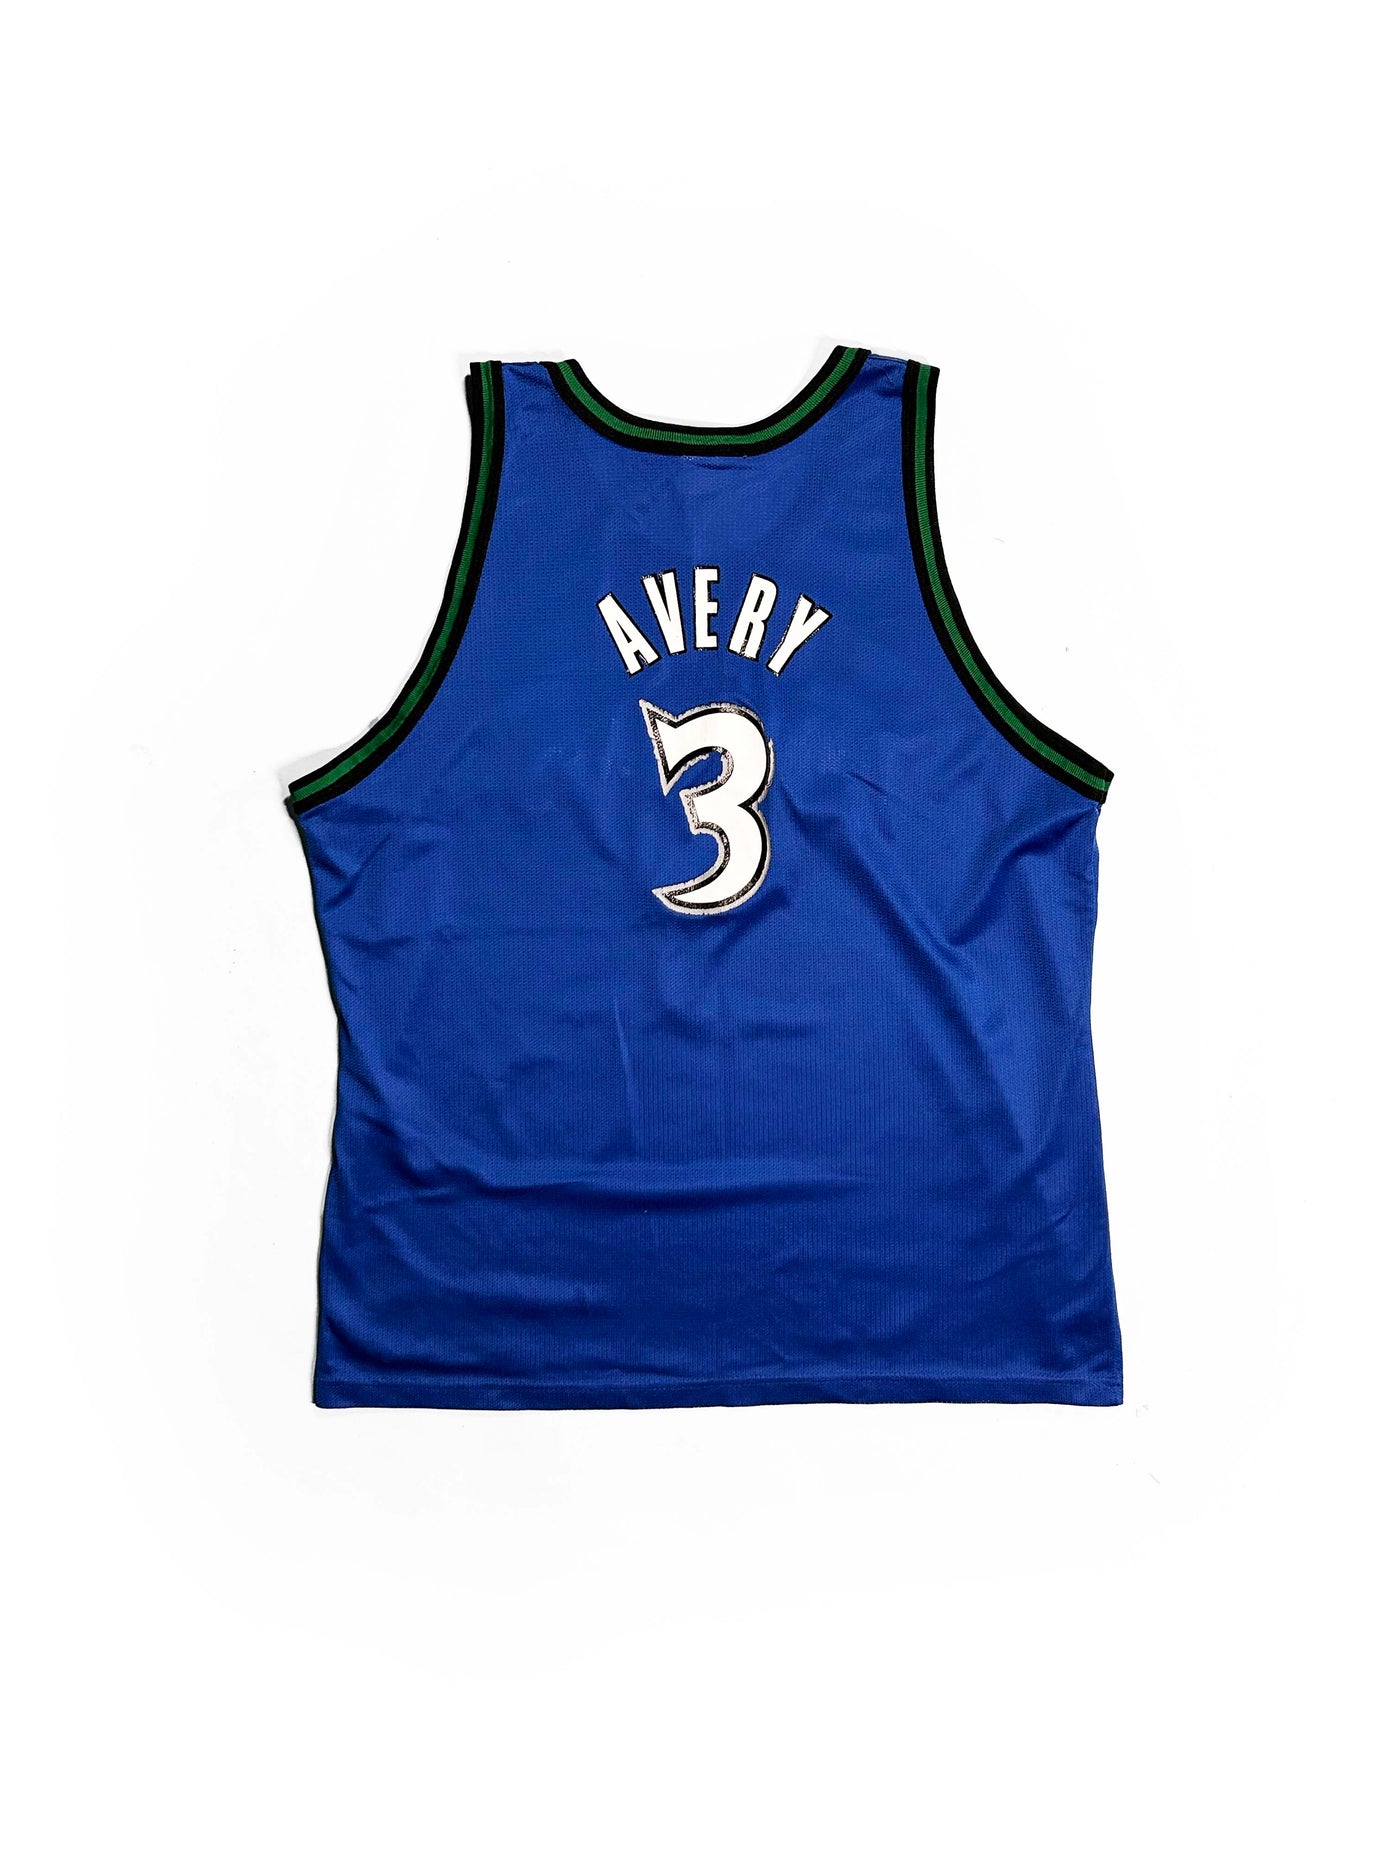 Vintage 90s Will Avery Timberwolves Jersey